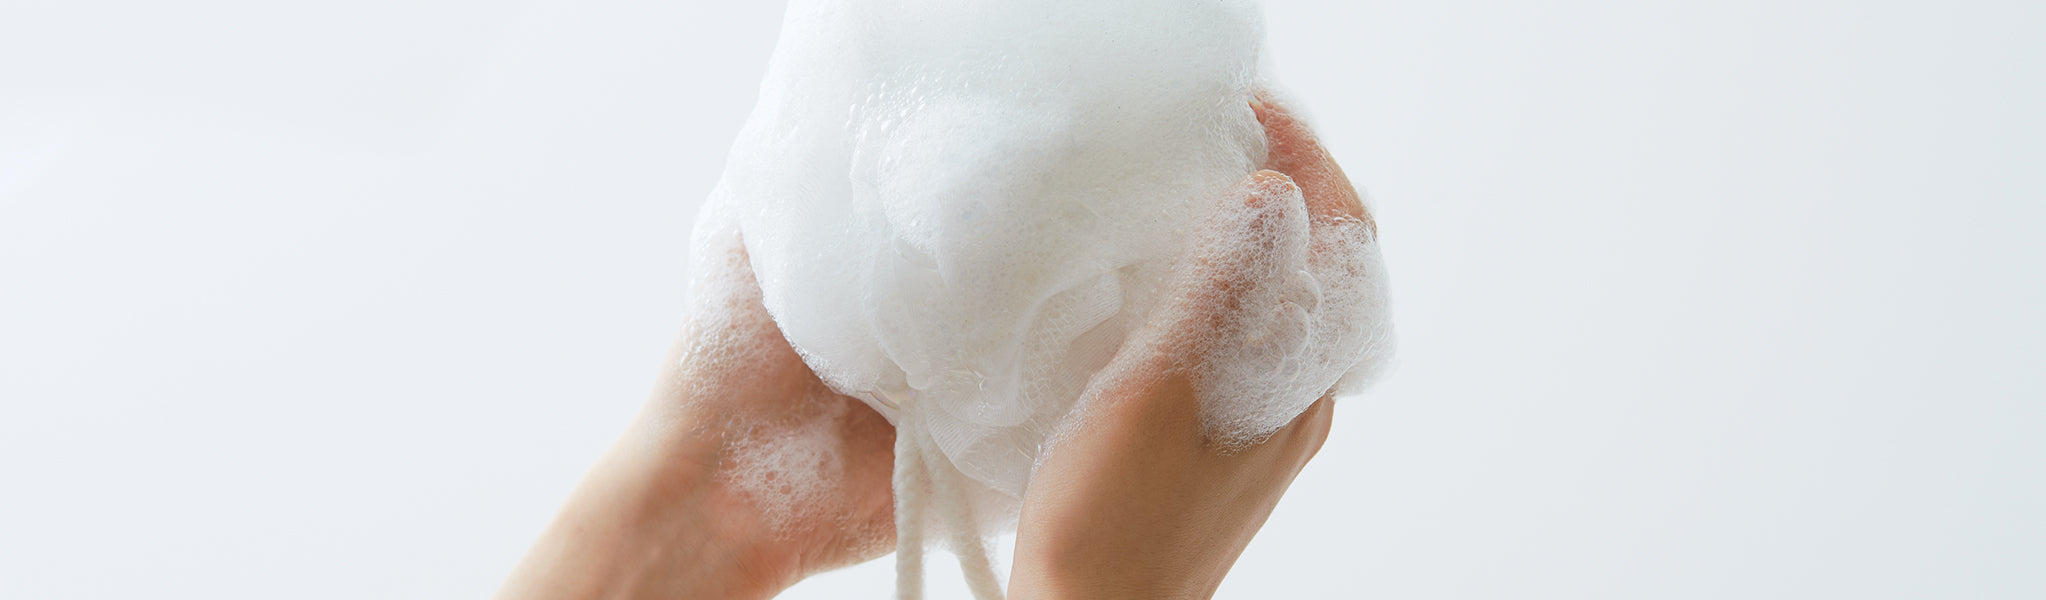 Hands holding a white foaming net ball lathered in soap